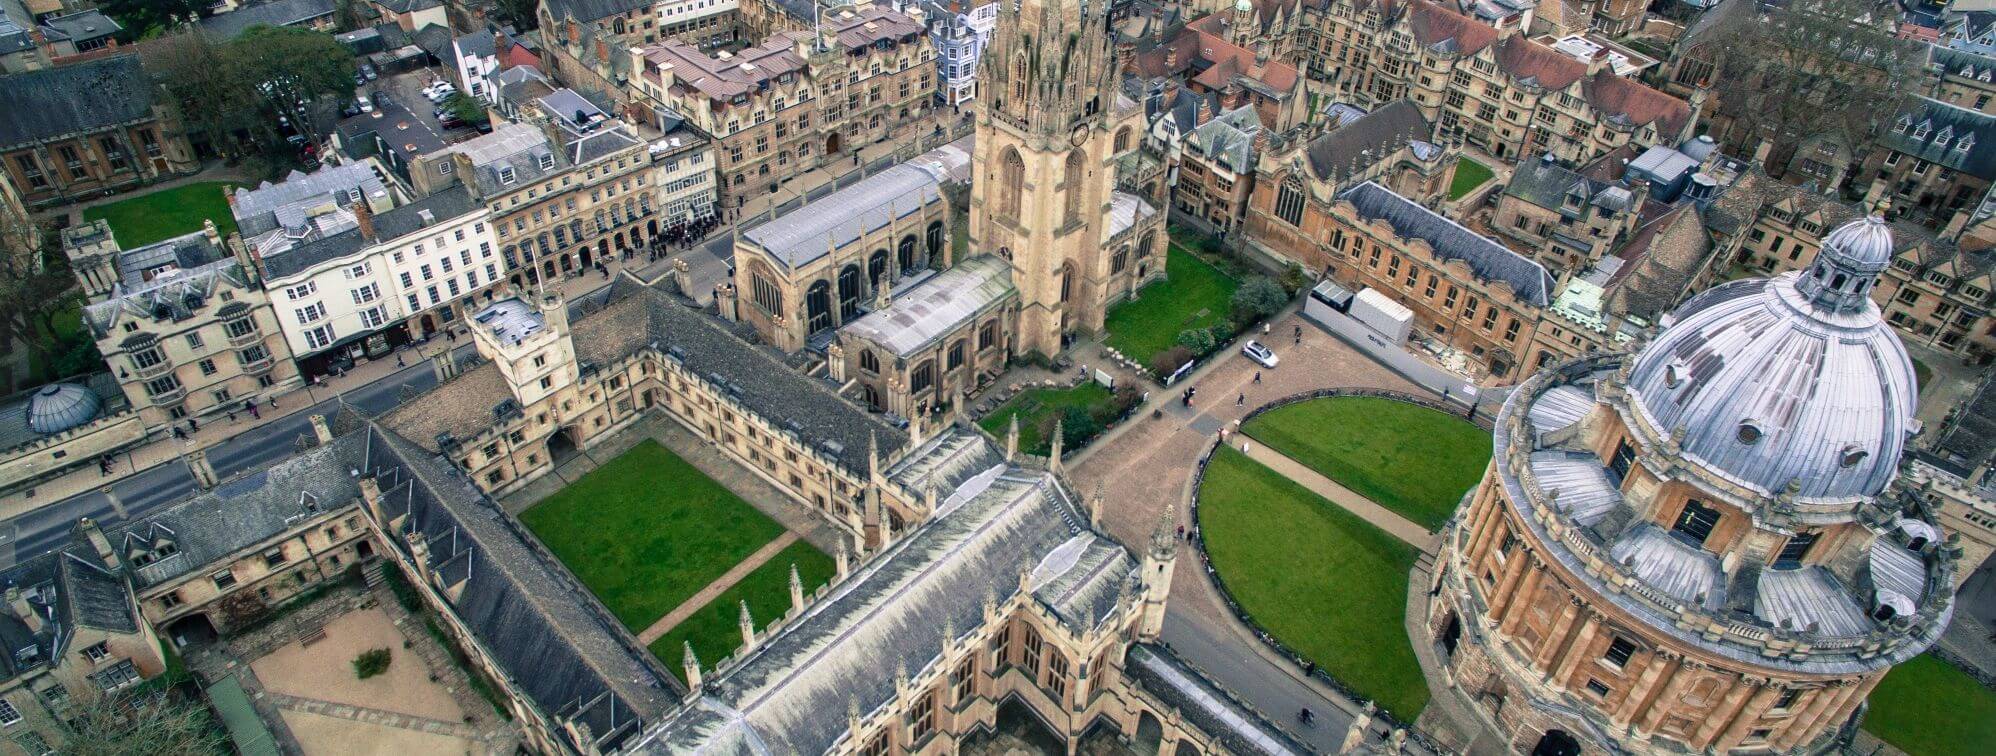 A bird's eye view of the Oxford university campus